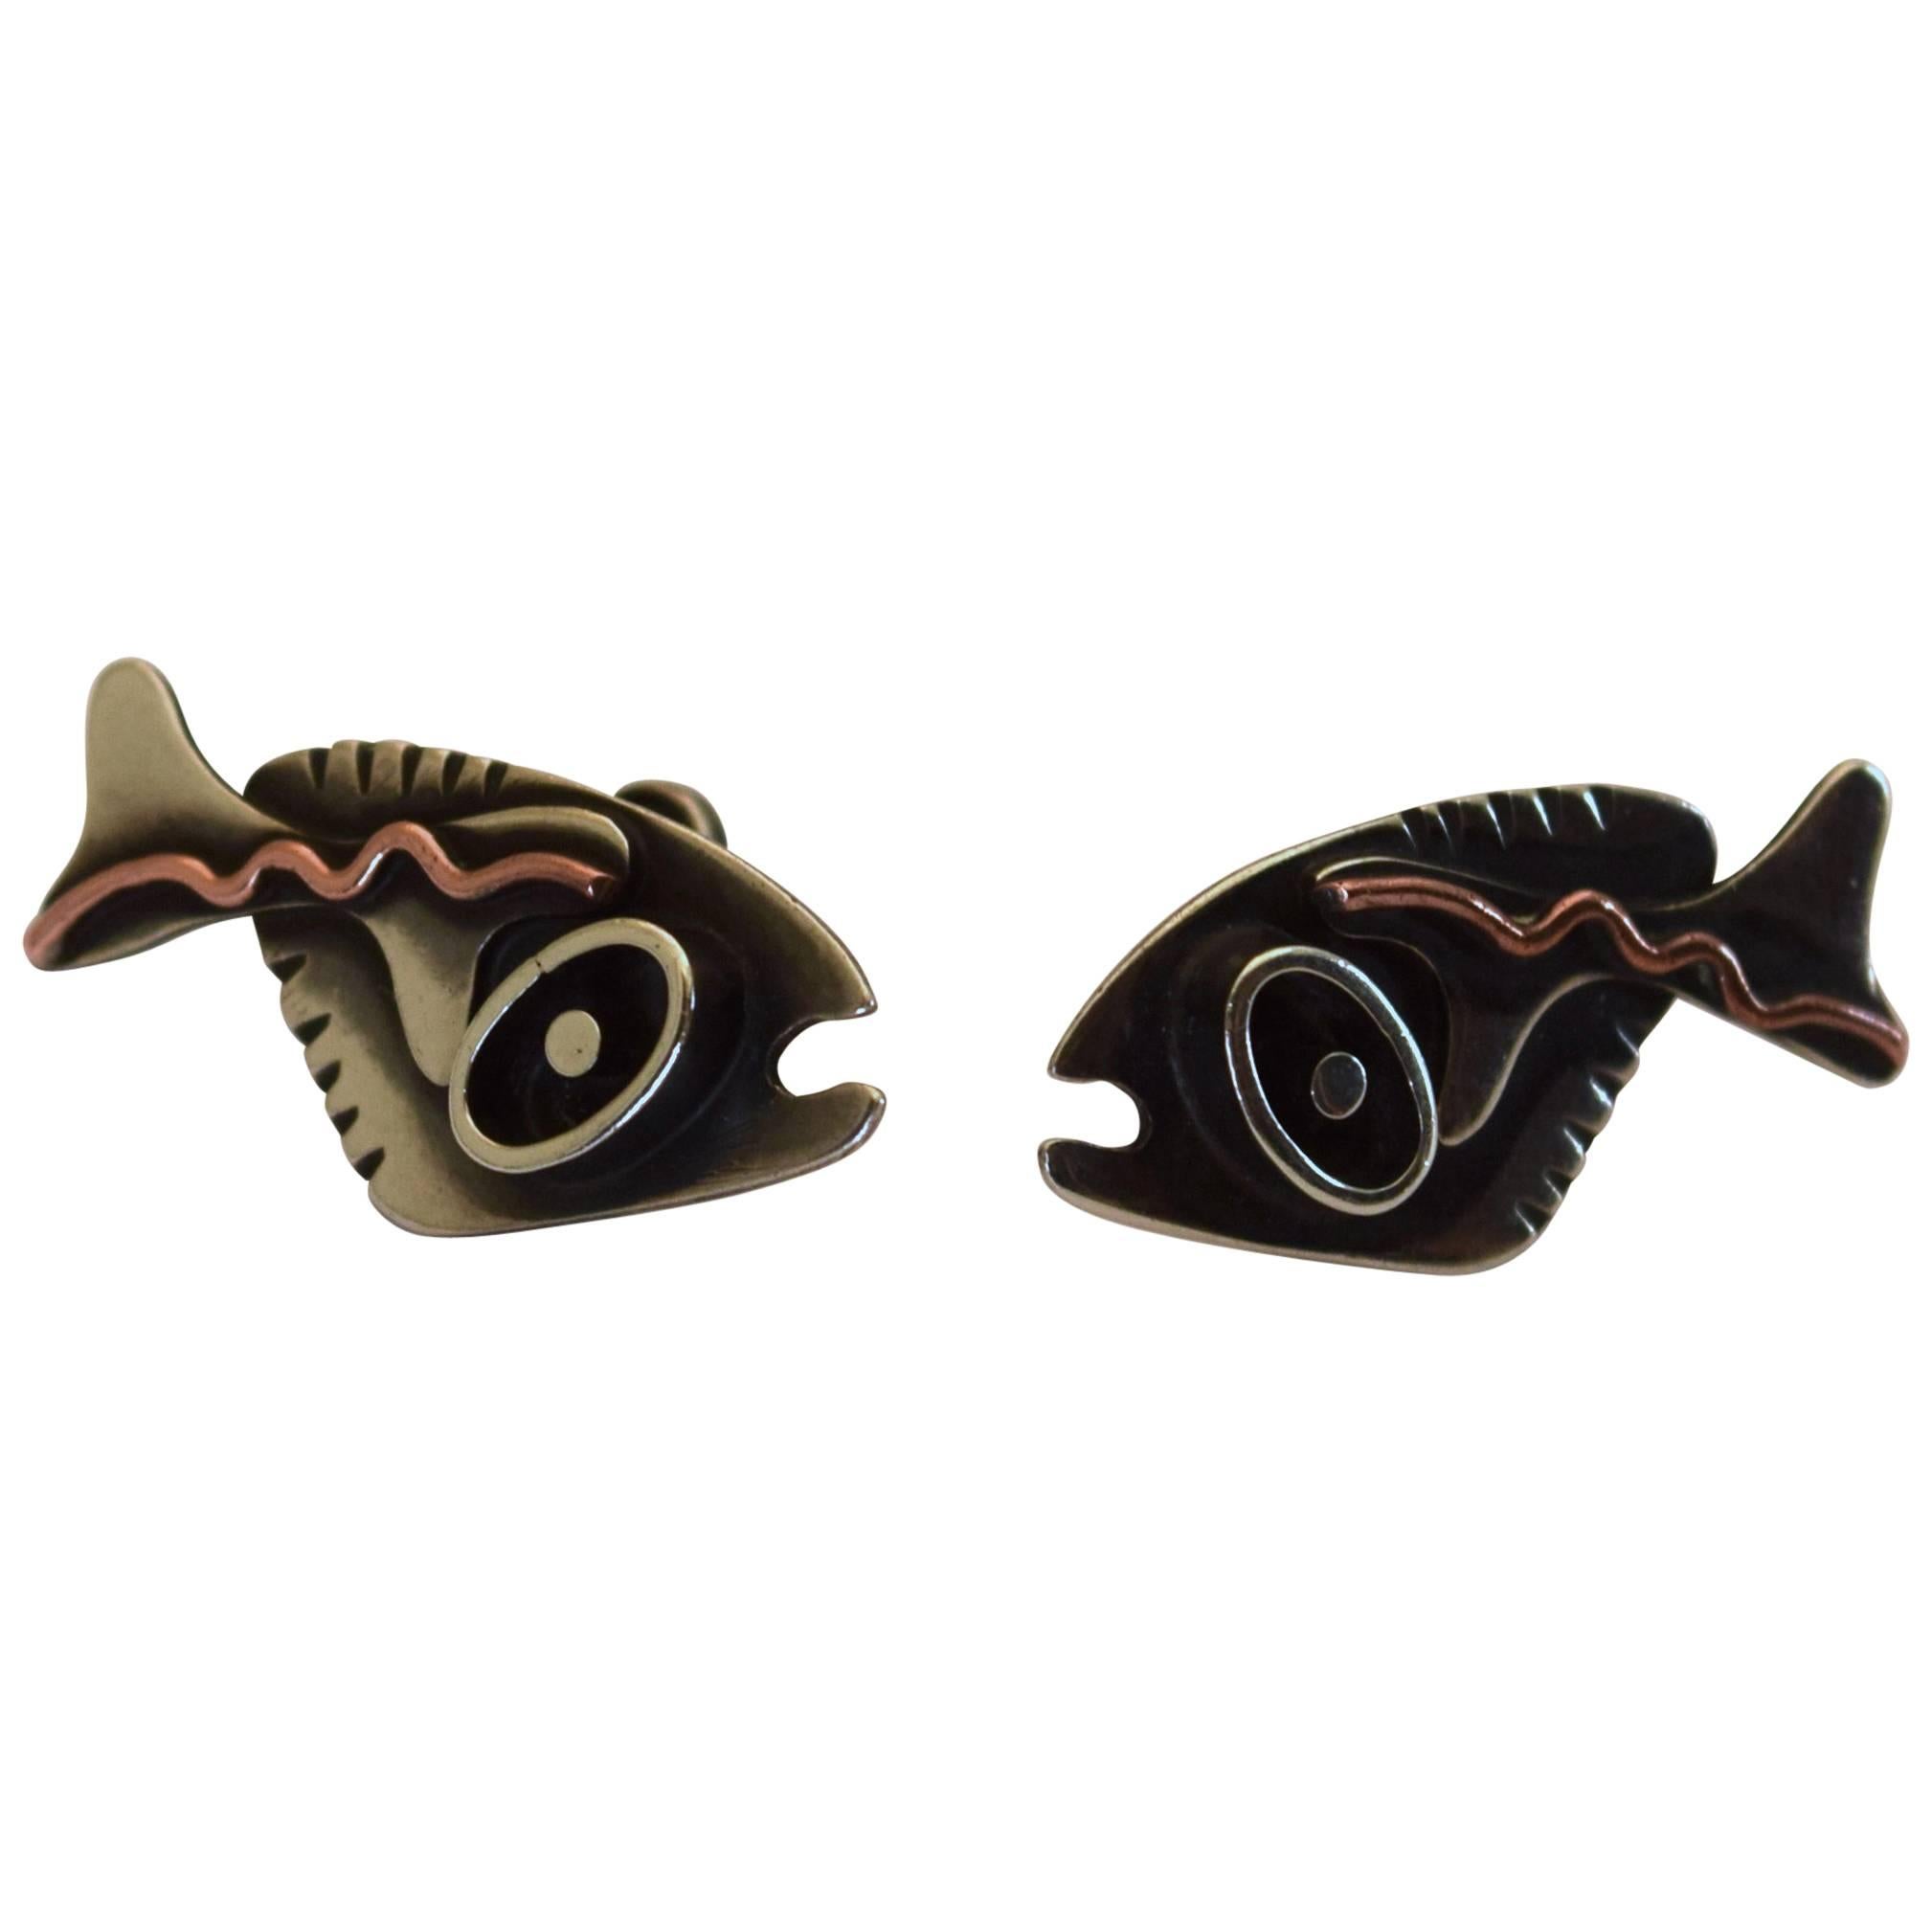 Early Ed Wiener Surreal Fish Earrings in Sterling and Copper